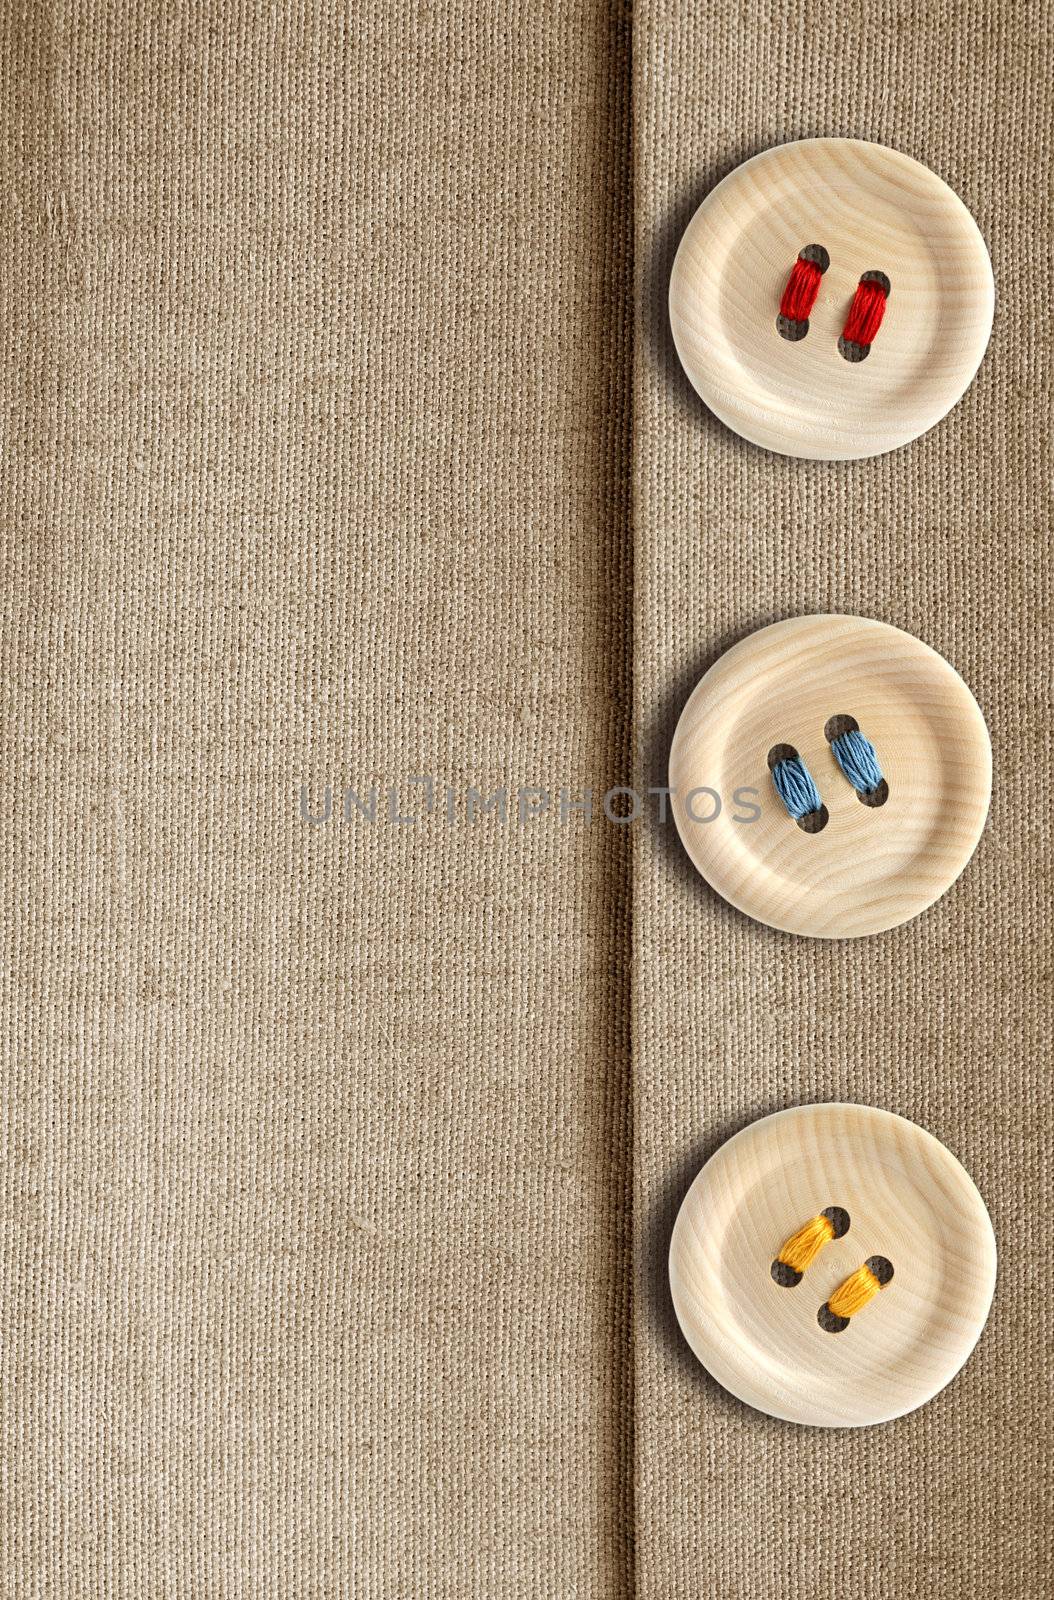 Buttons On Canvas by kvkirillov